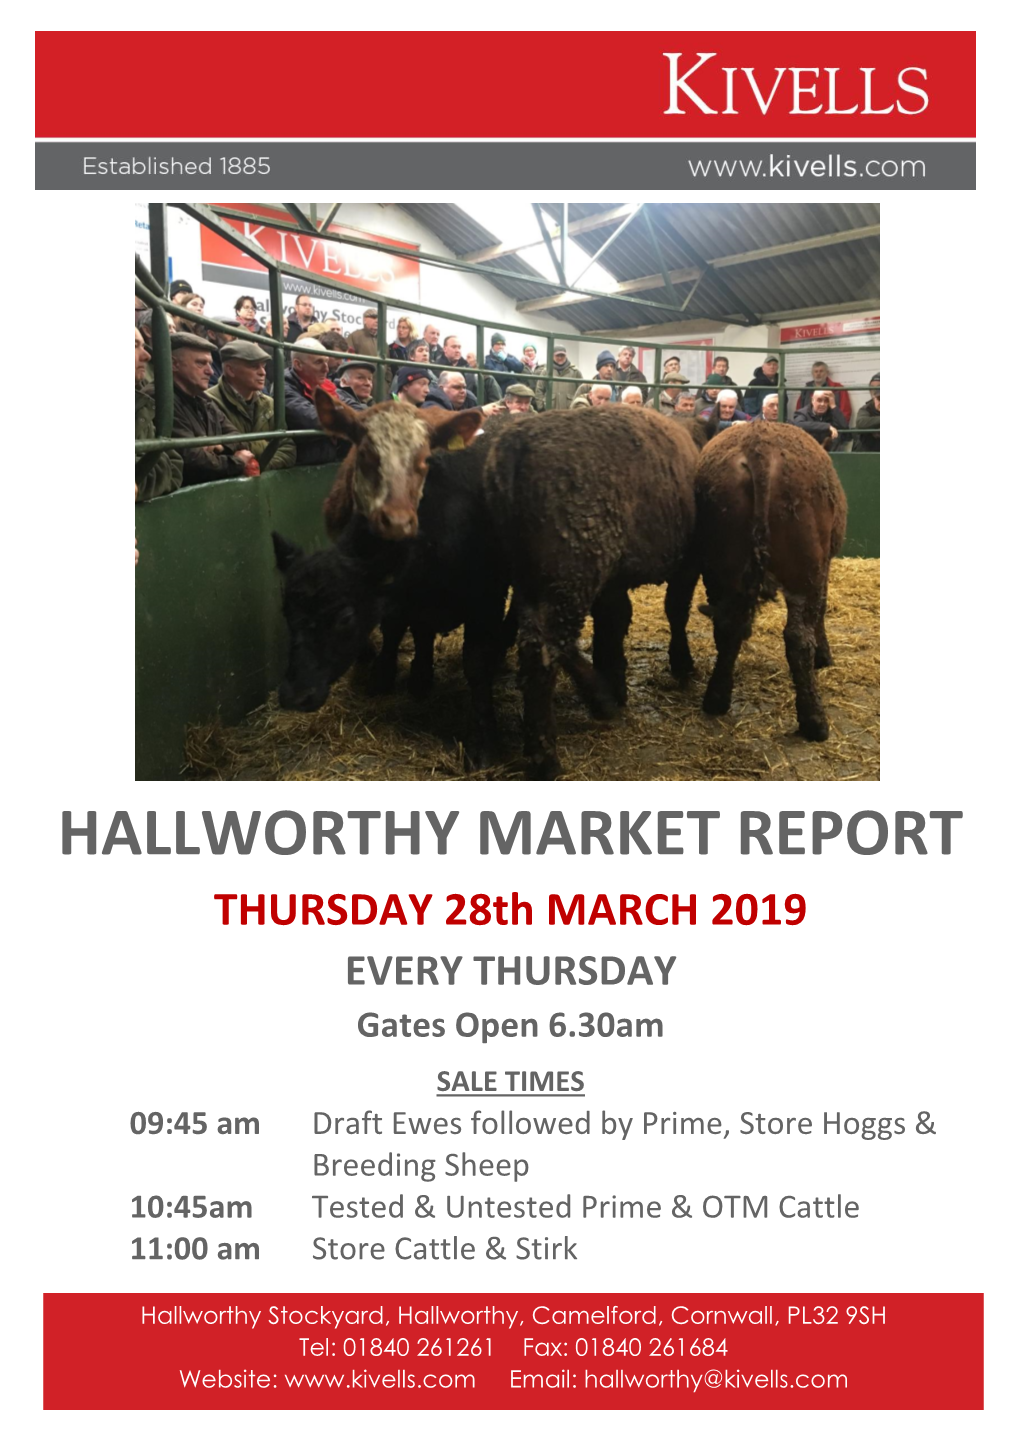 HALLWORTHY MARKET REPORT THURSDAY 28Th MARCH 2019 EVERY THURSDAY Gates Open 6.30Am